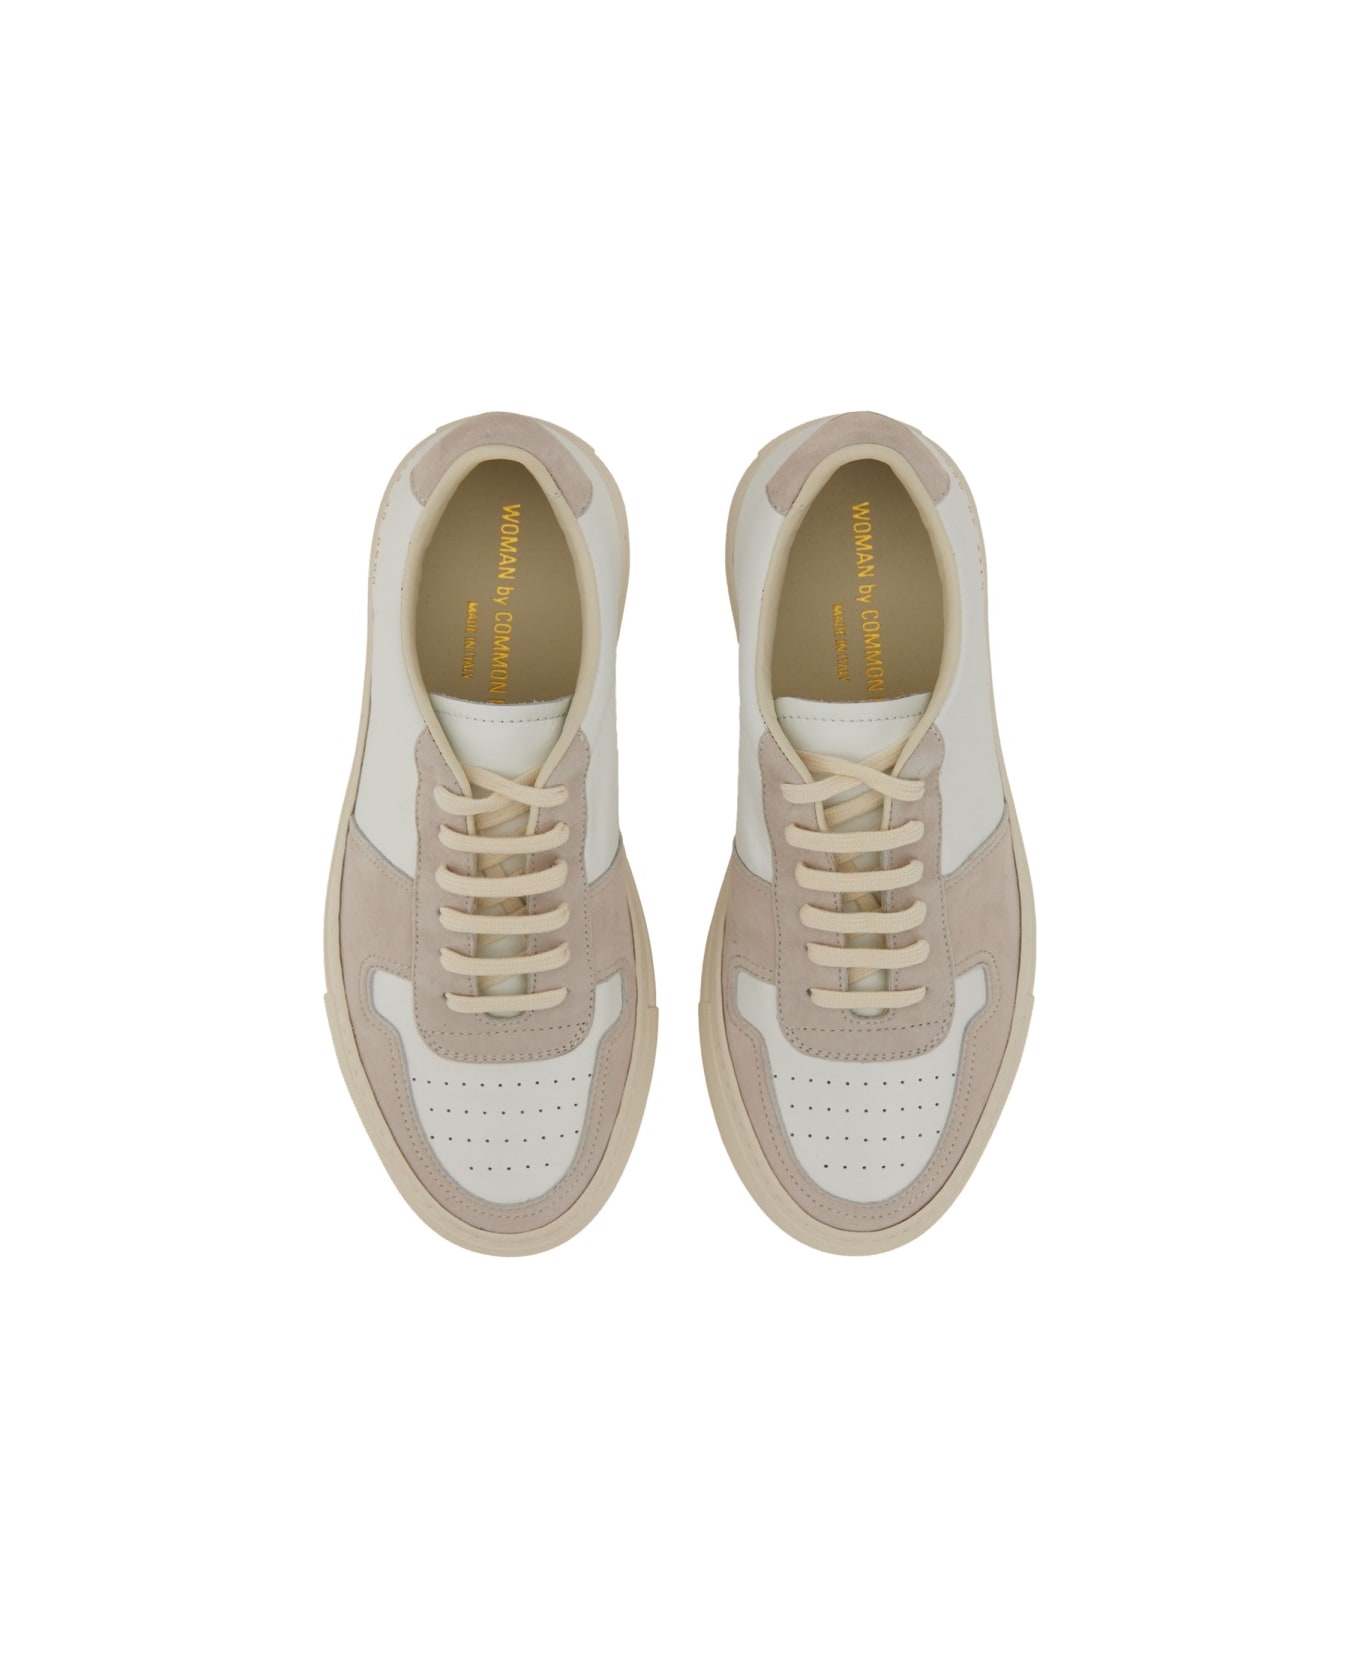 Common Projects 'bball' Sneaker - NUDE スニーカー